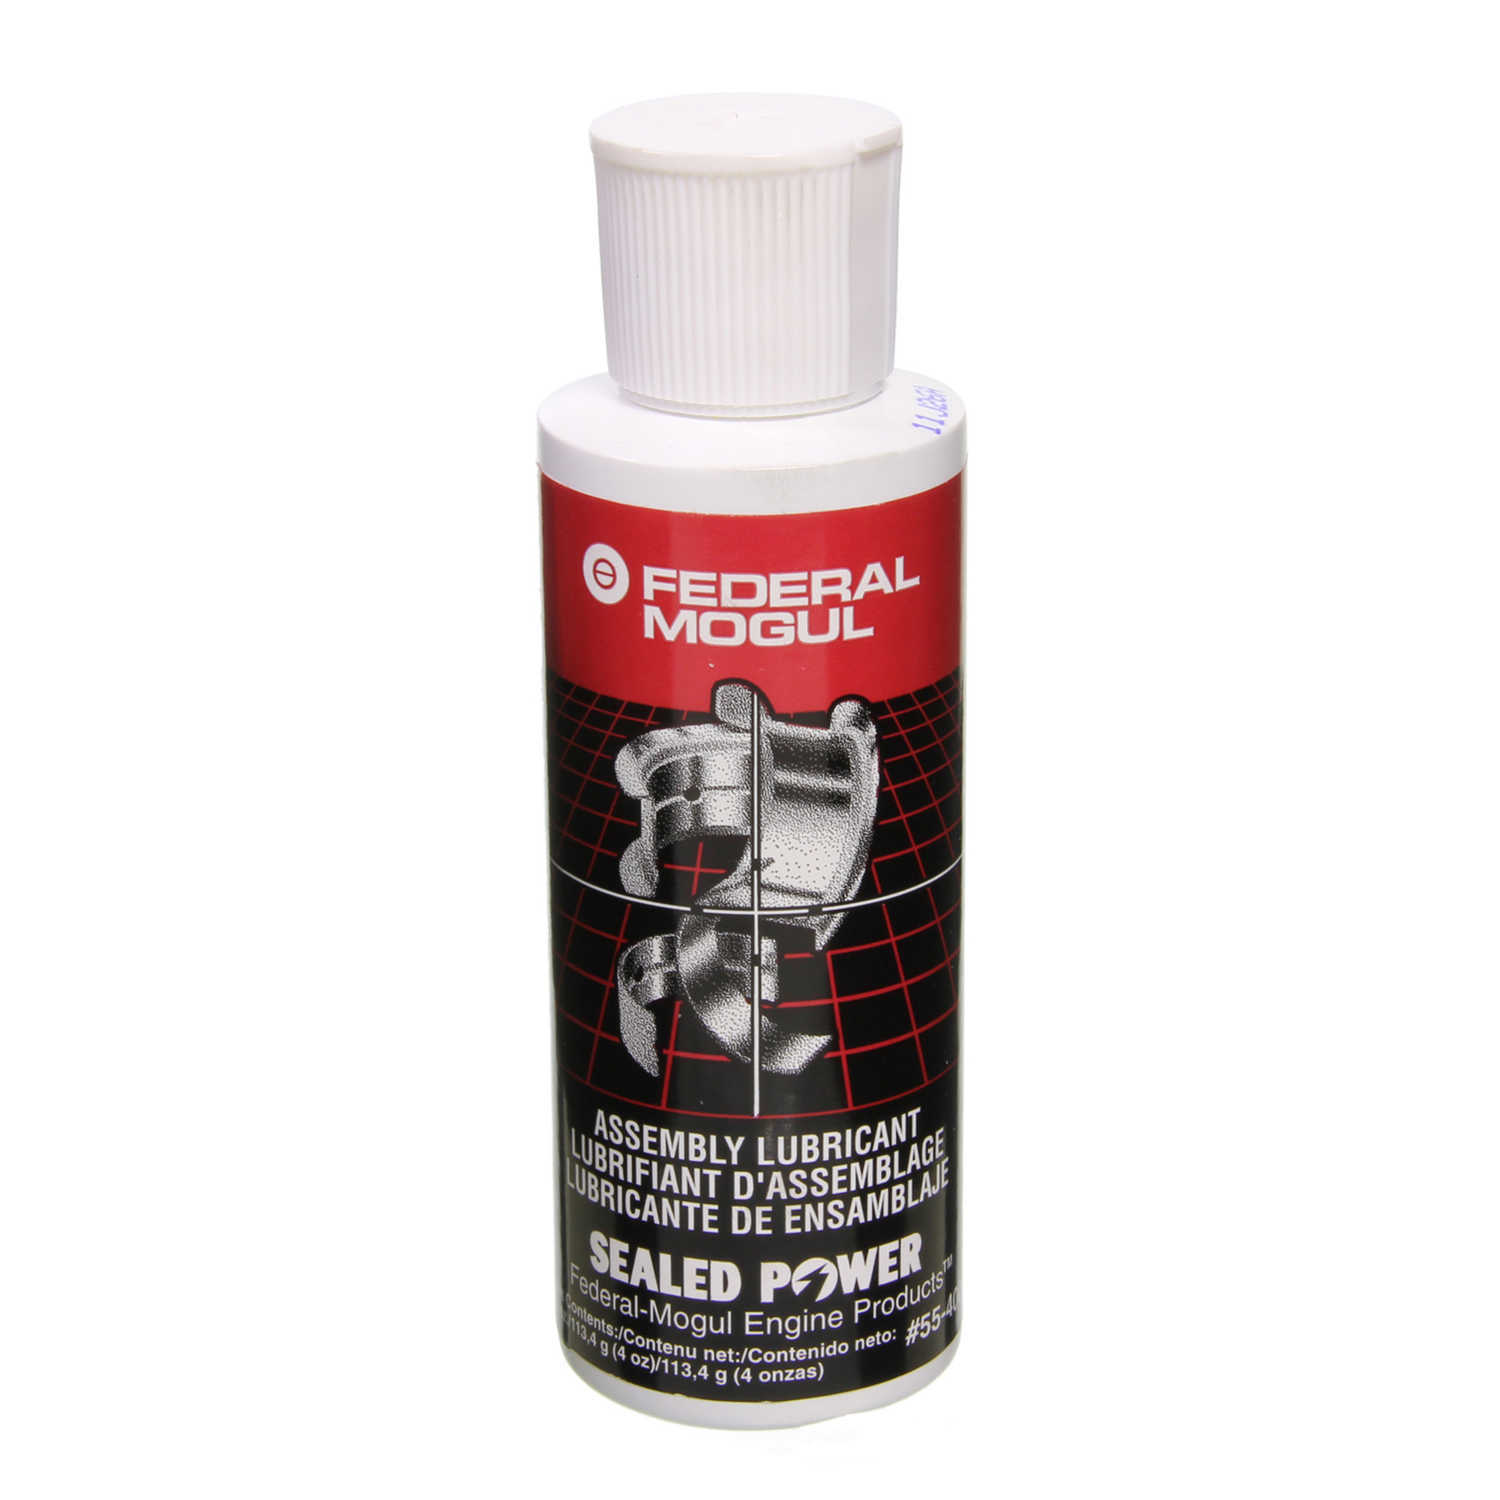 SEALED POWER - Assembly Lubricant - SEA 55-400